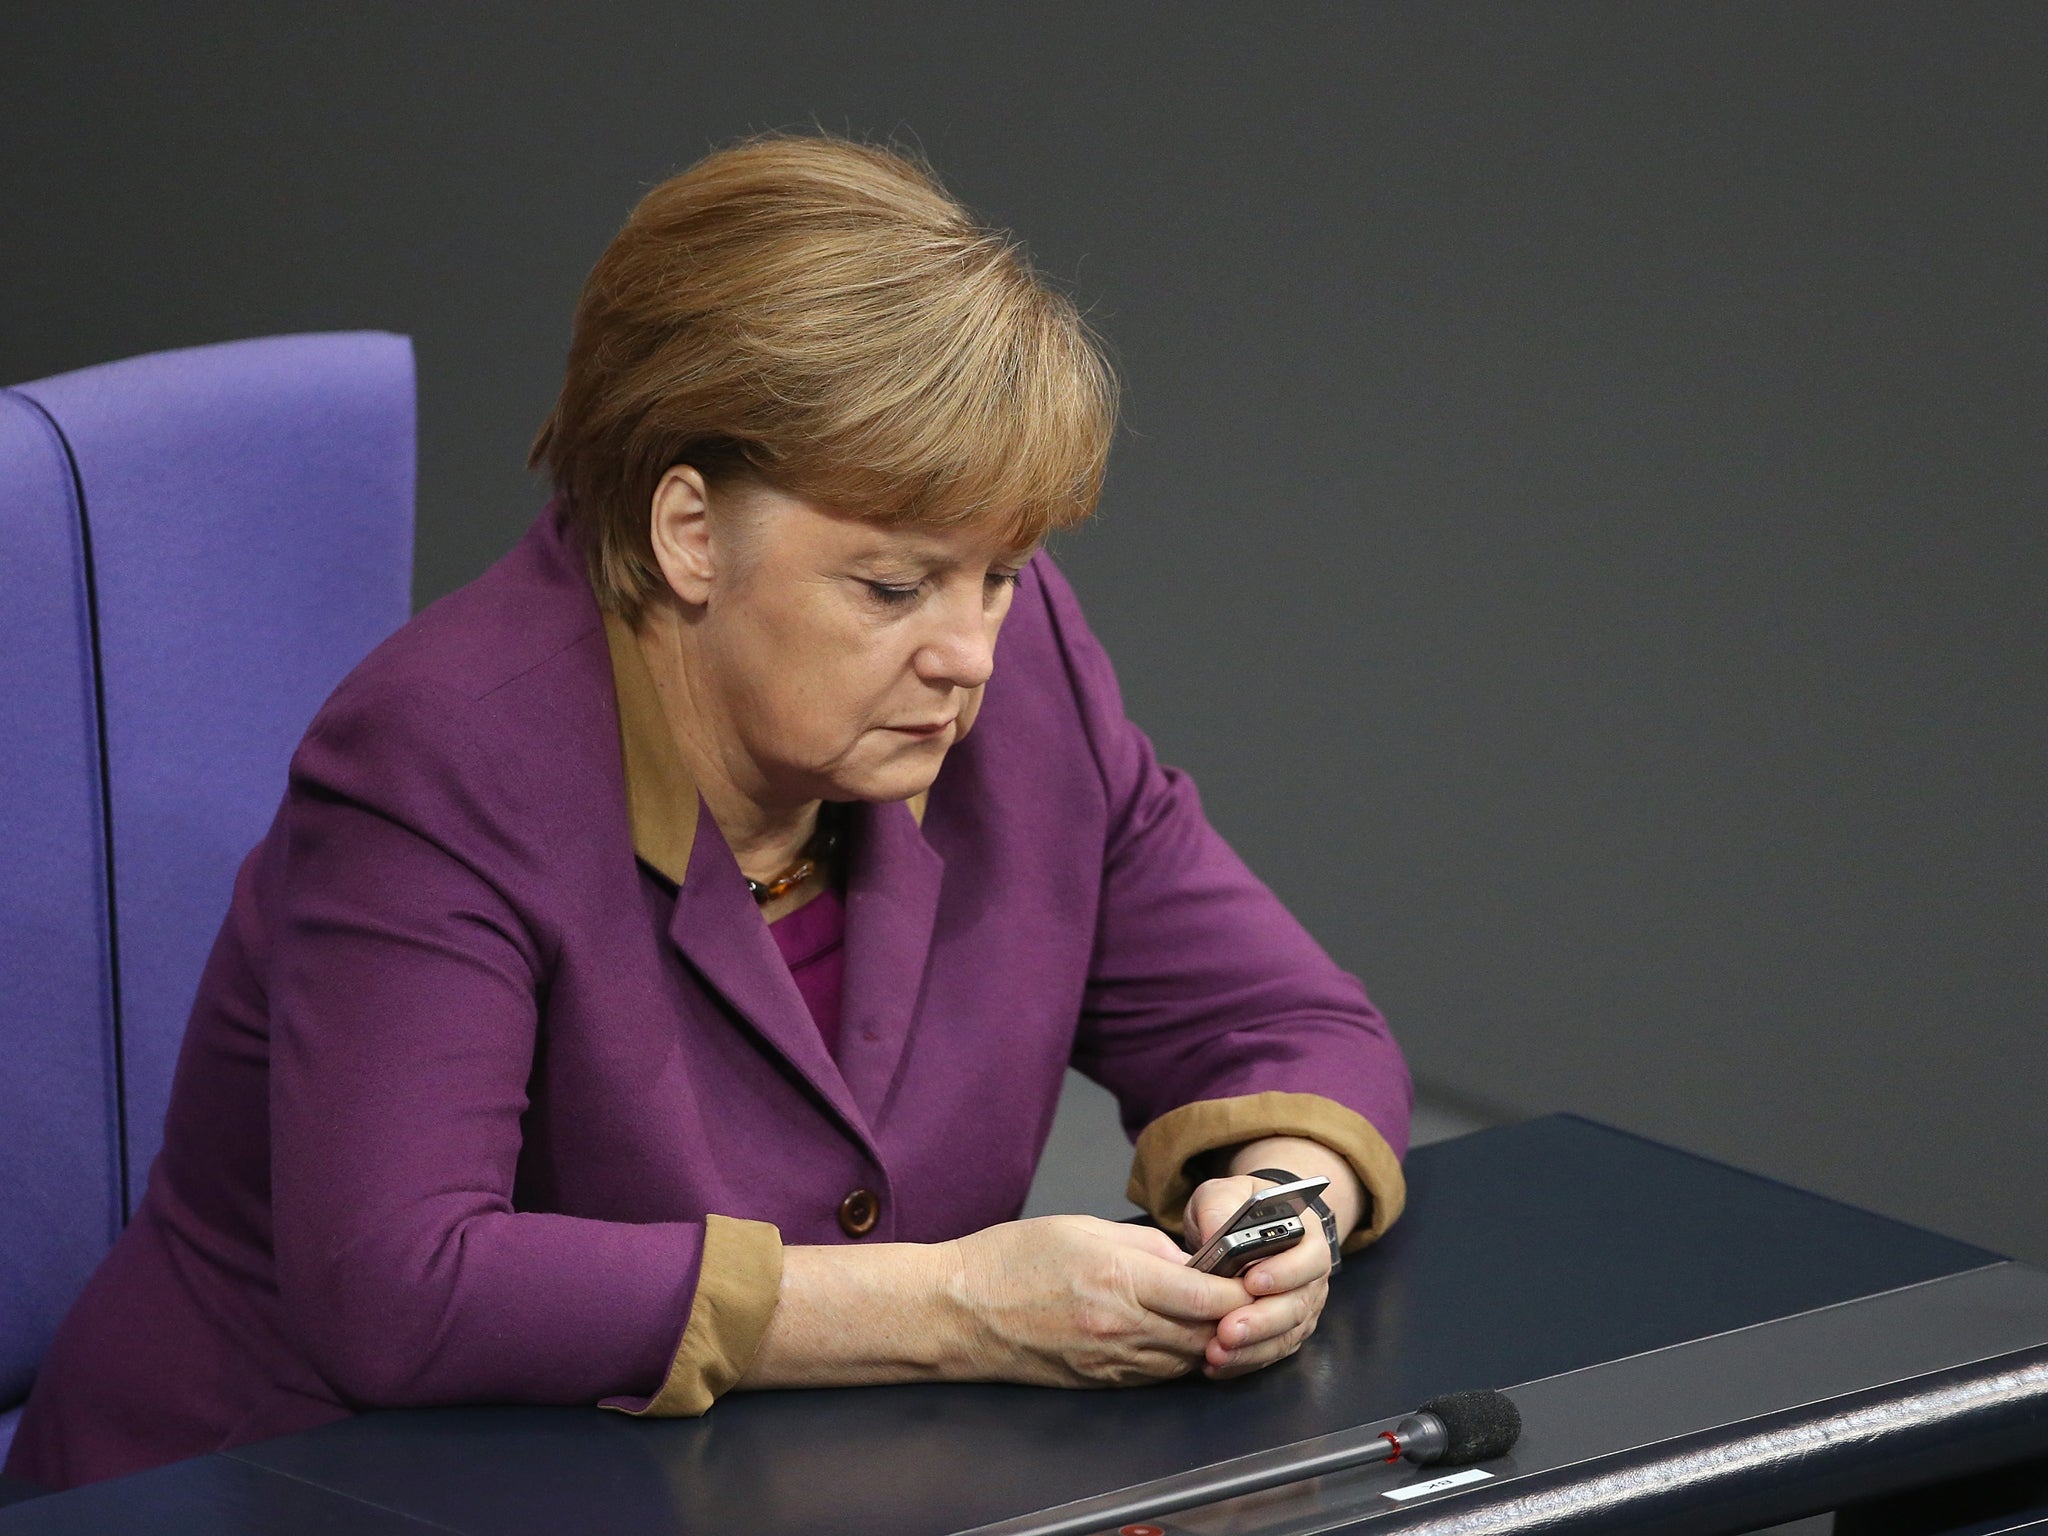 German Chancellor Angela Merkel checks her mobile phone during a session of the Bundestag on November 30, 2012 in Berlin